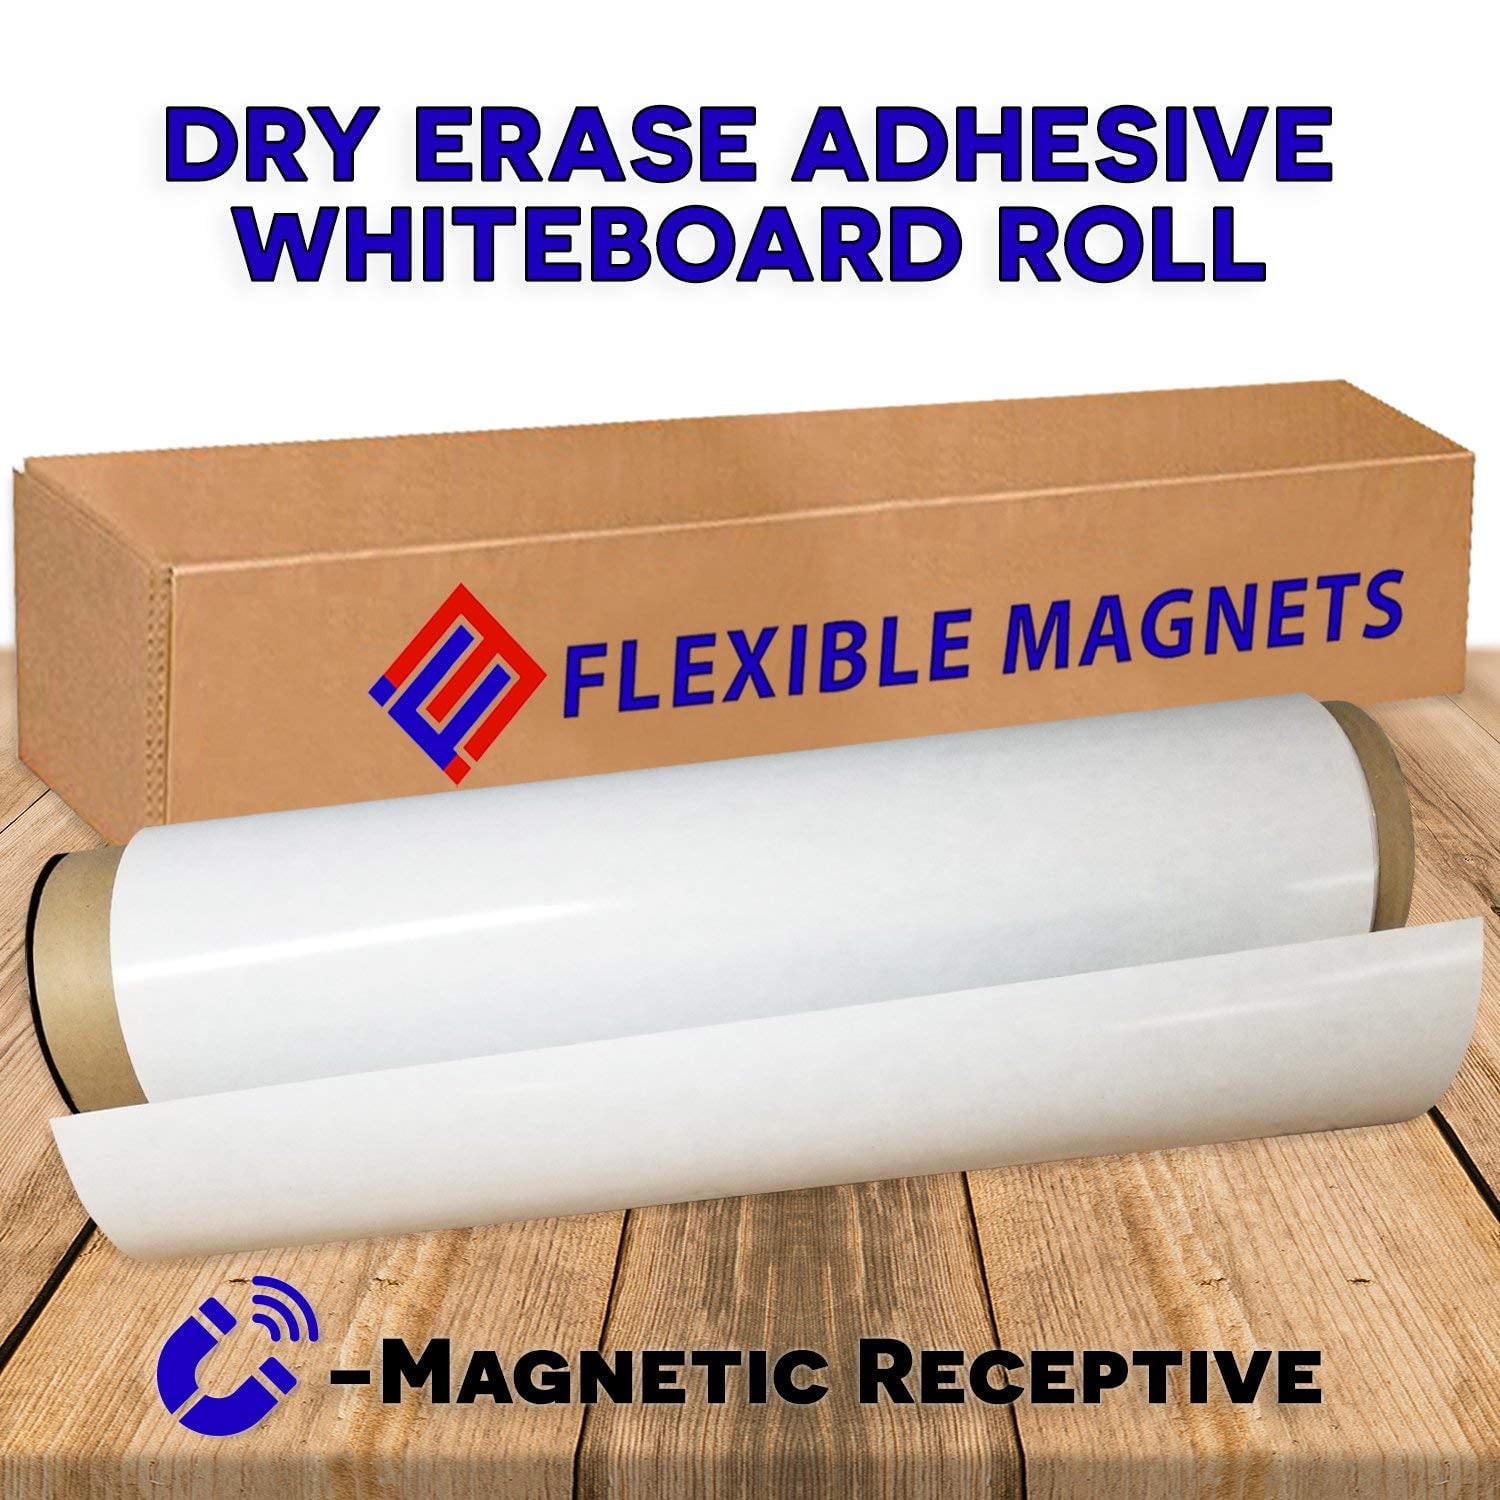 4 Mil white writing film Self-Adhesive Whiteboard Sticker home office school USE 